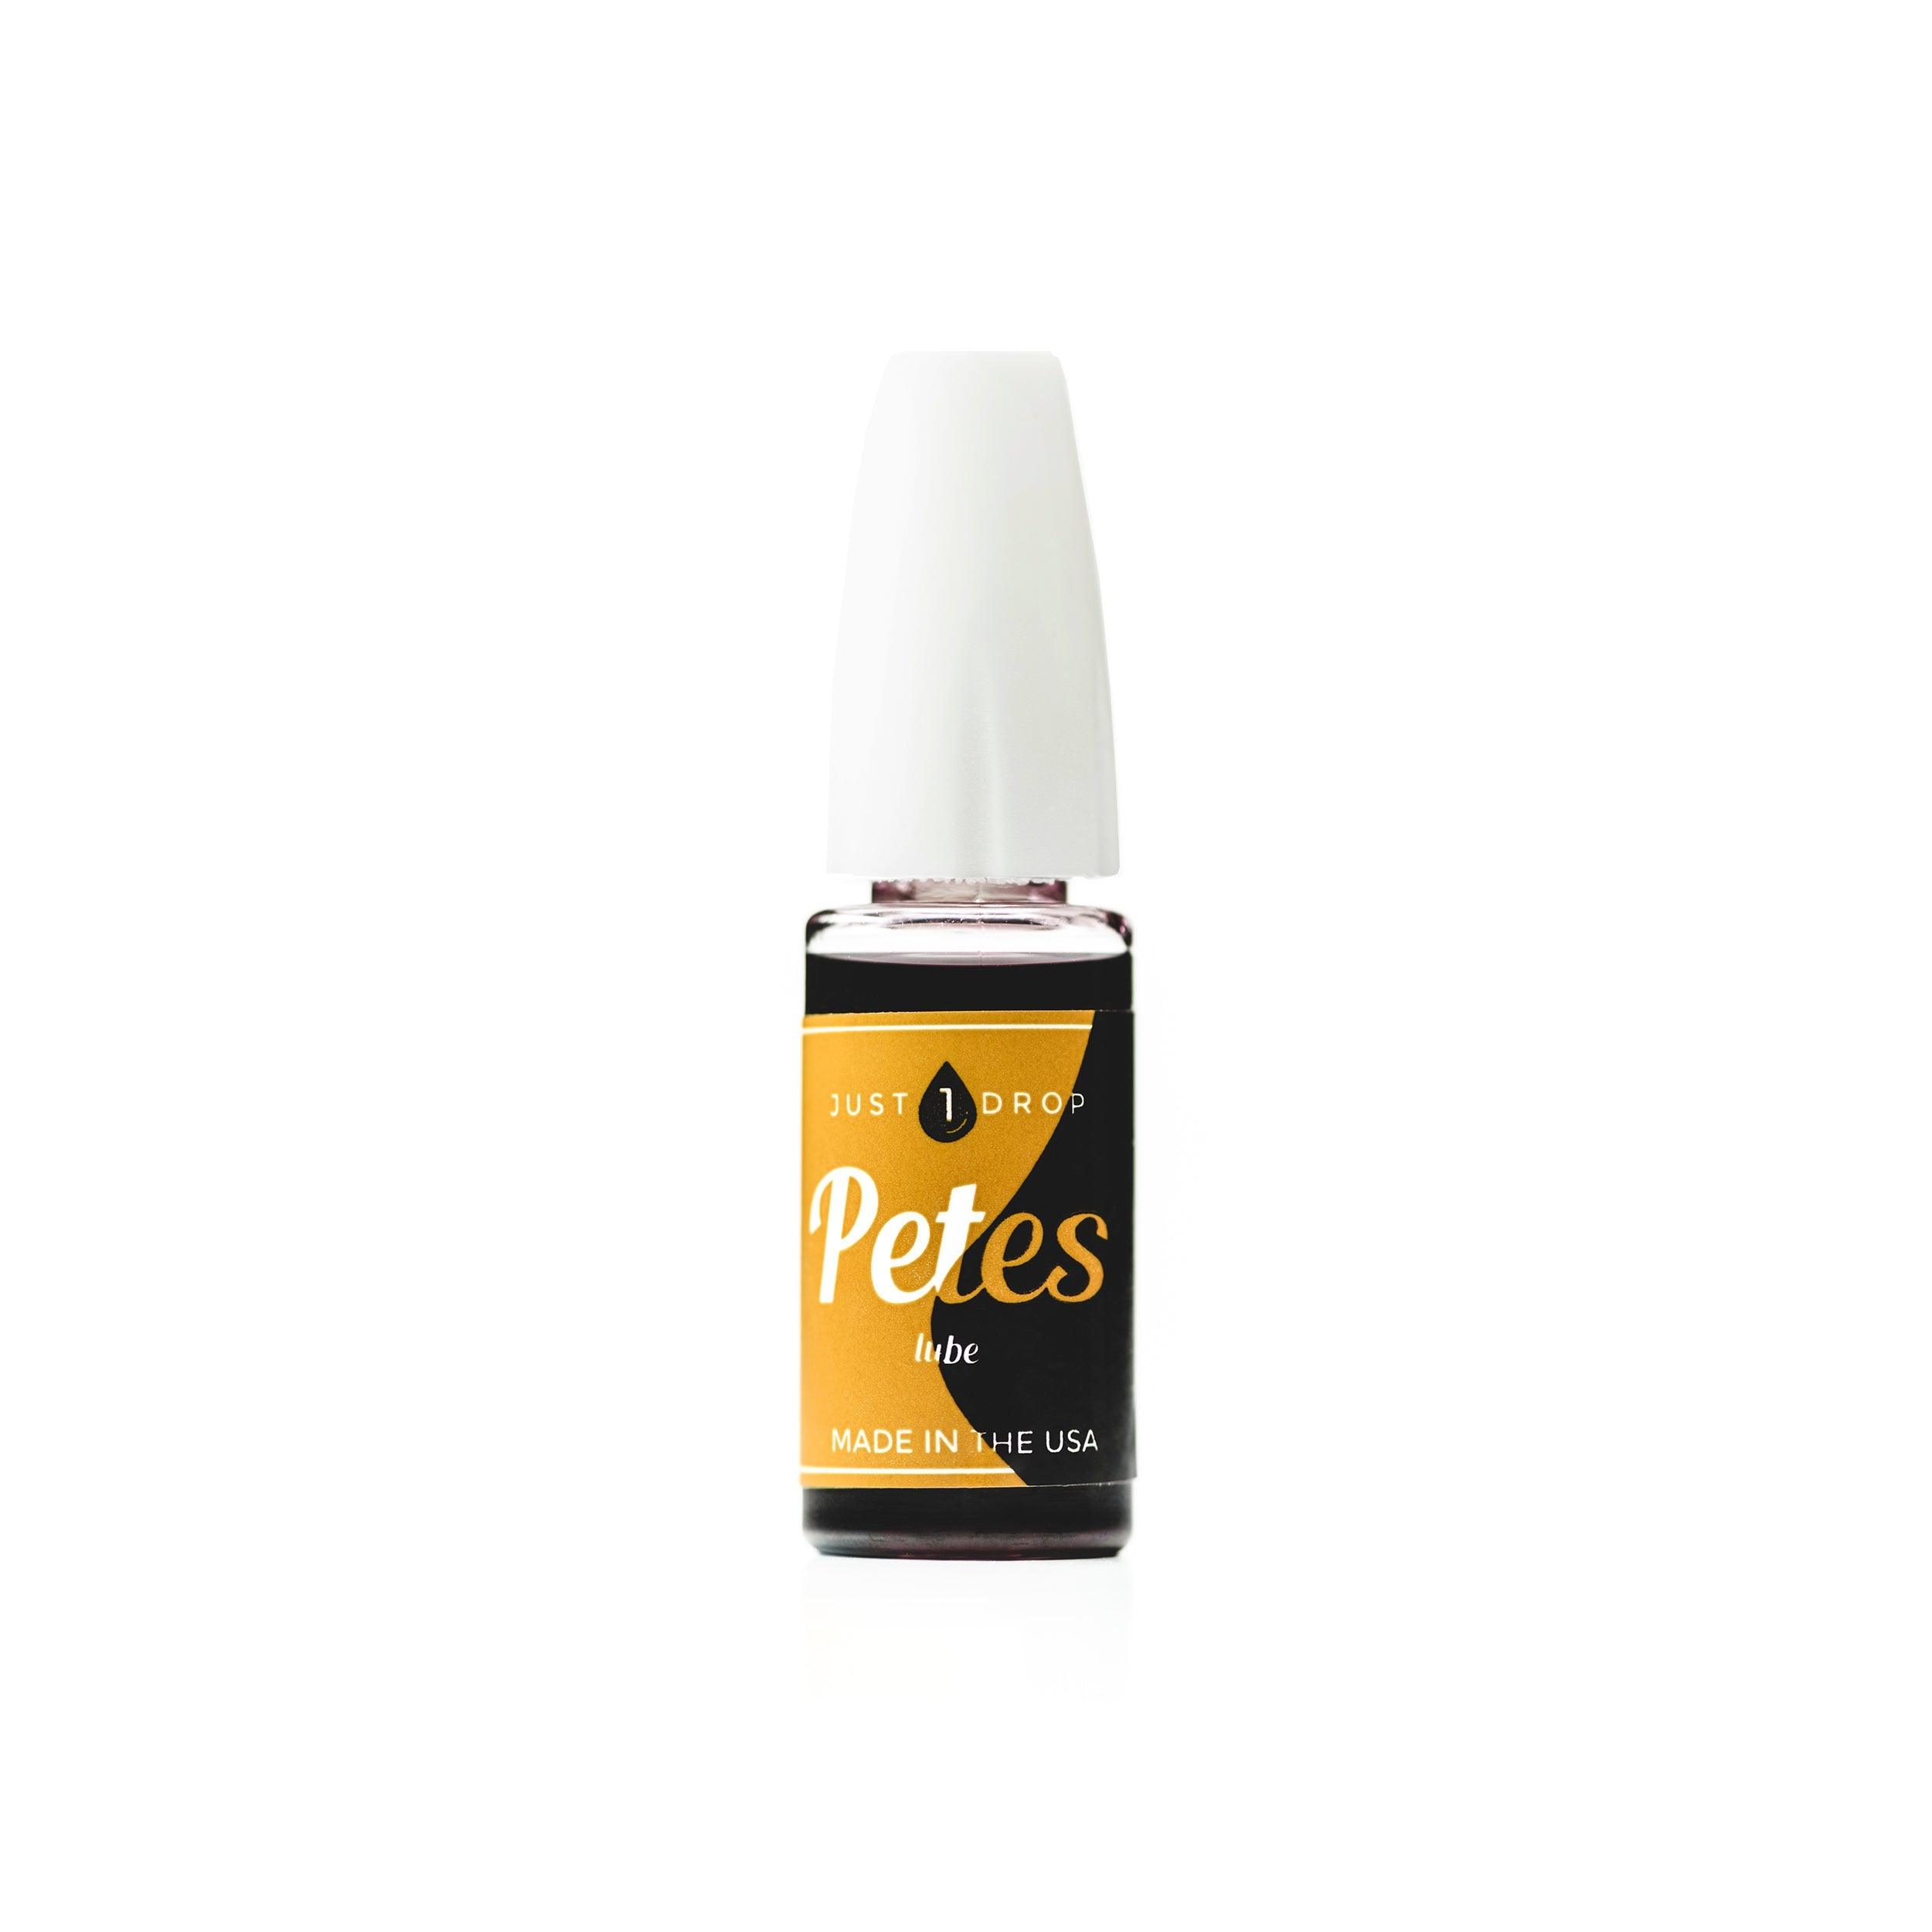 Petes Lube — Pocket Knife Oil by WESN - Vysn